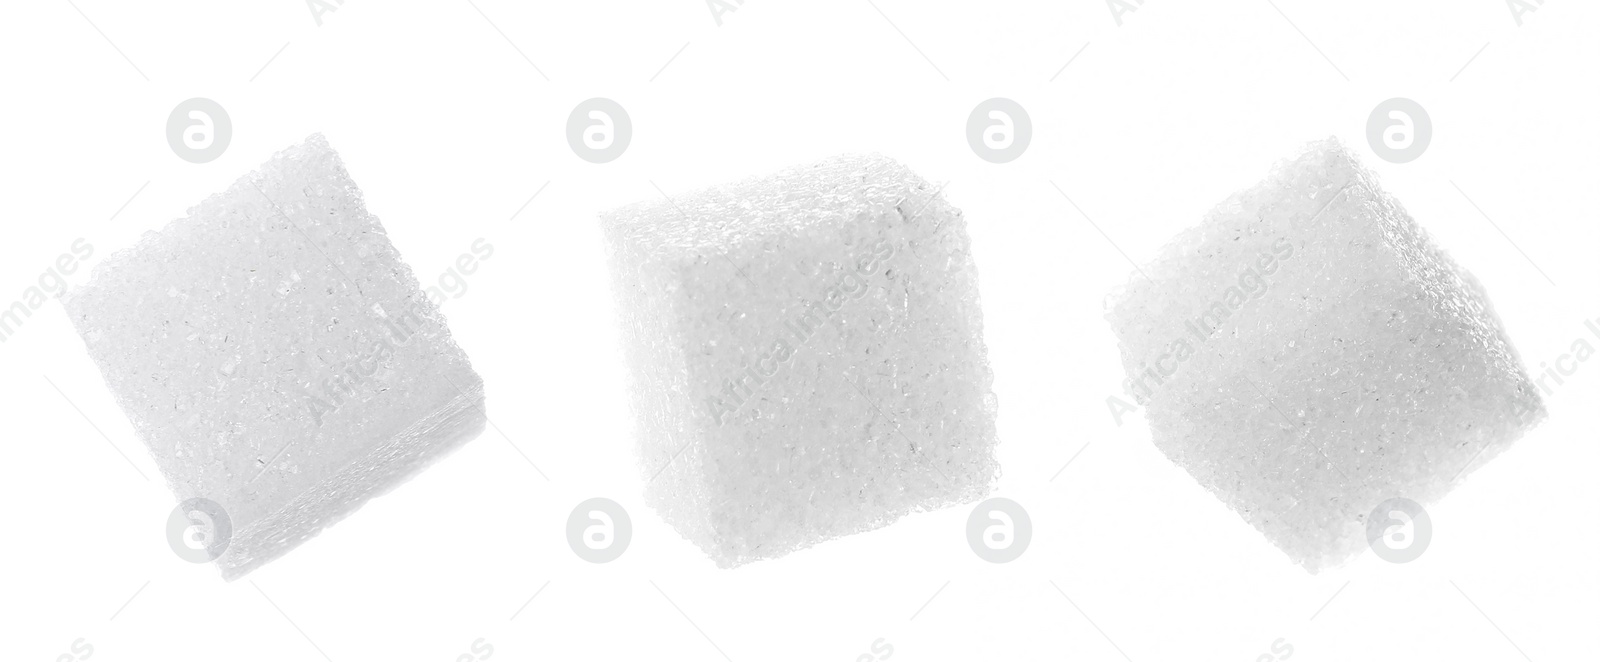 Image of Refined sugar cubes isolated on white, set